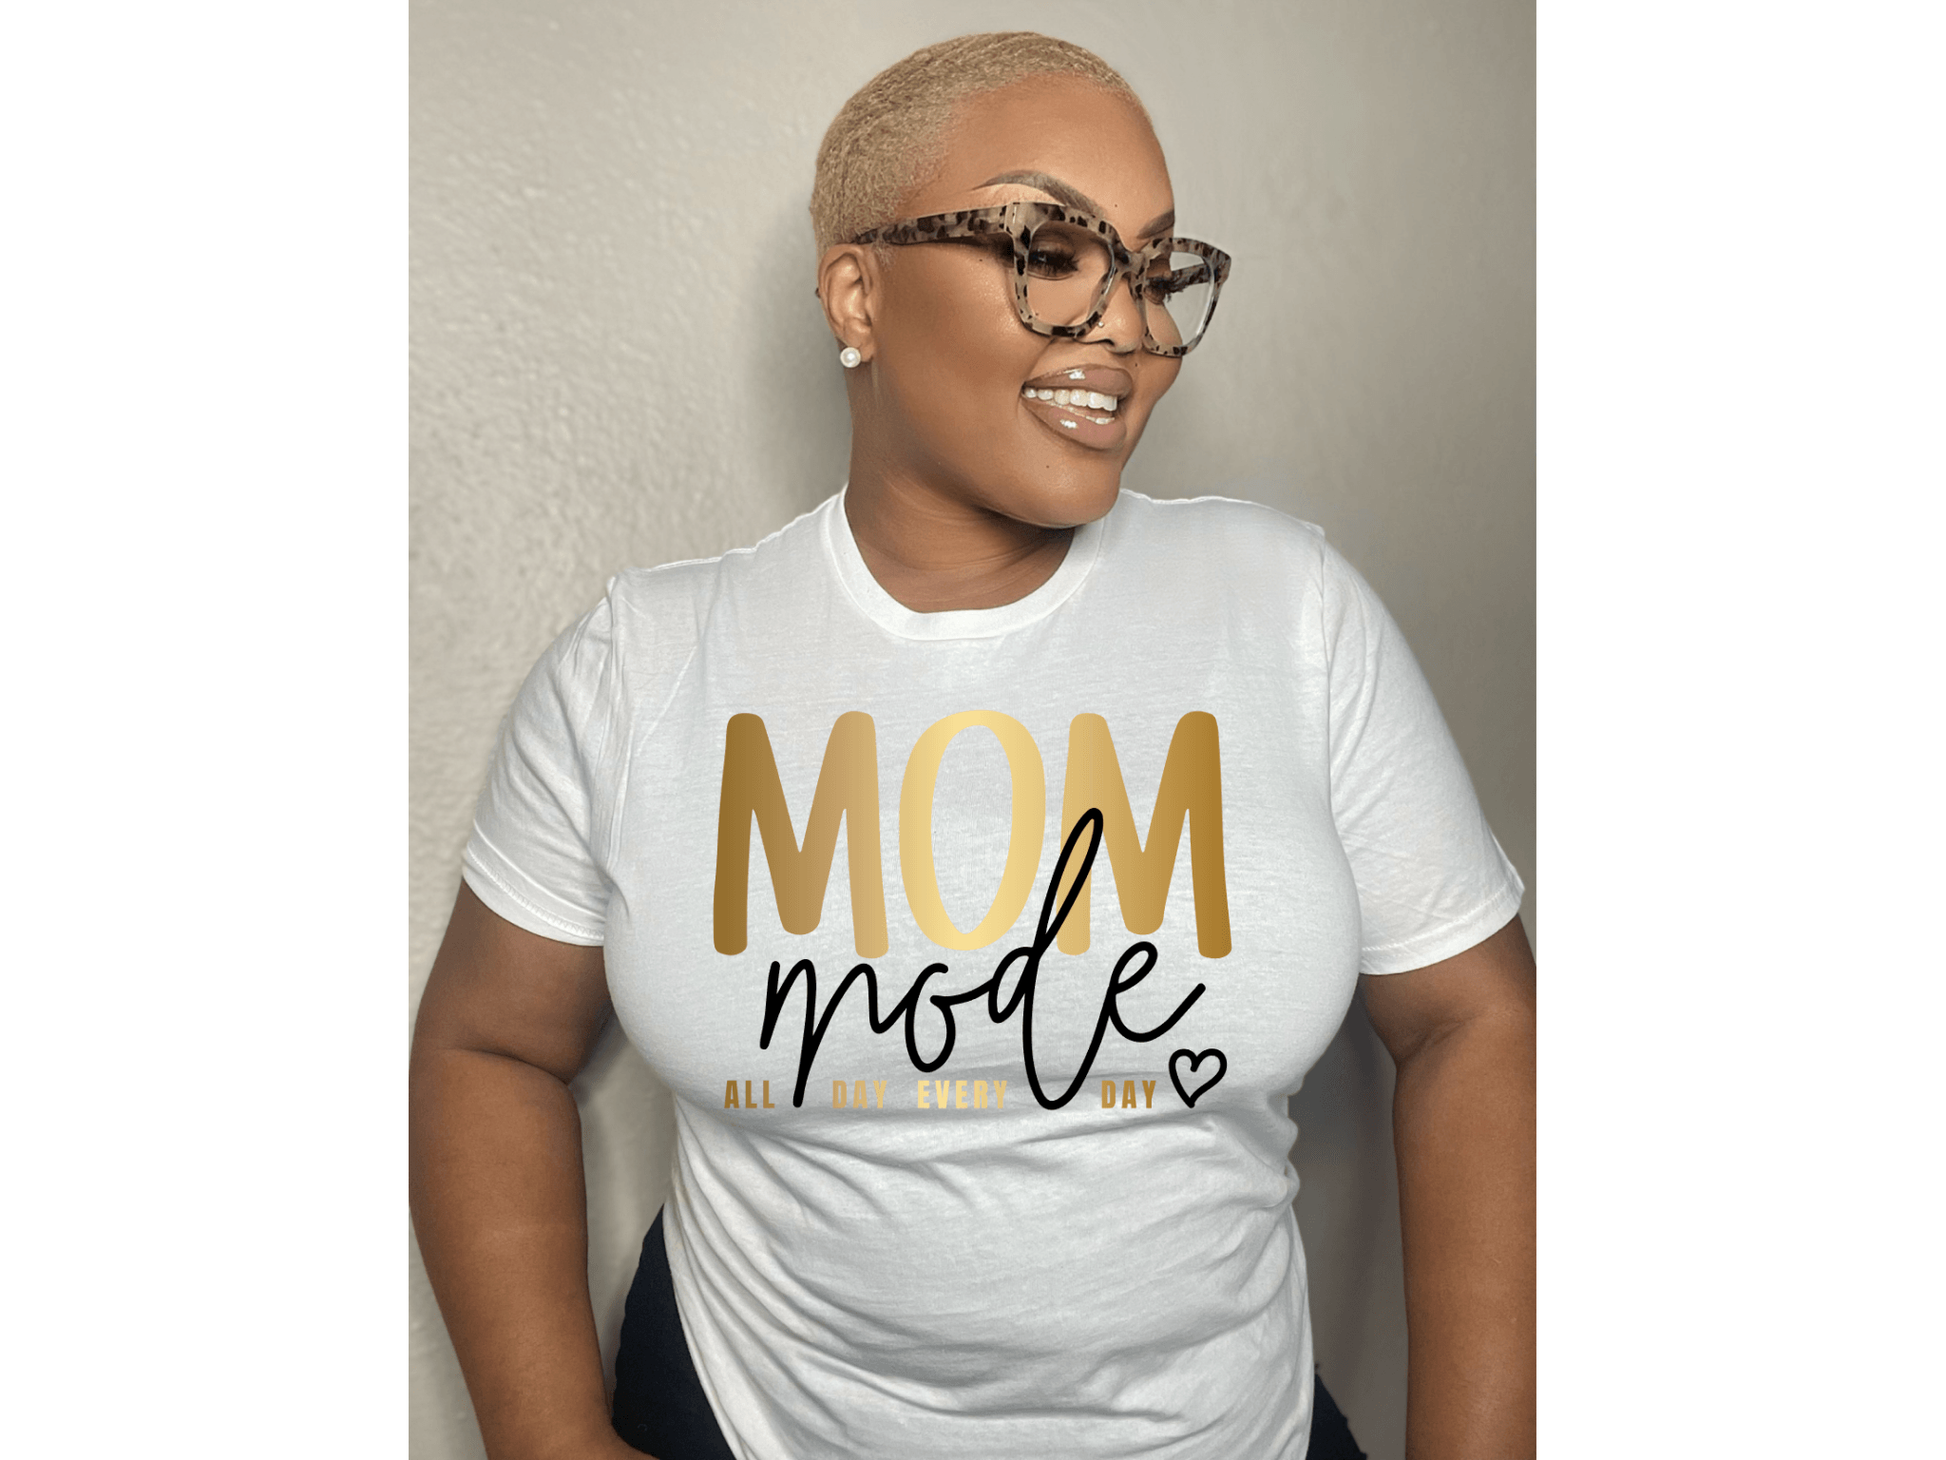 Mom mode all day everyday t-shirt or hoodie (New Arrival) - smuniqueshirts